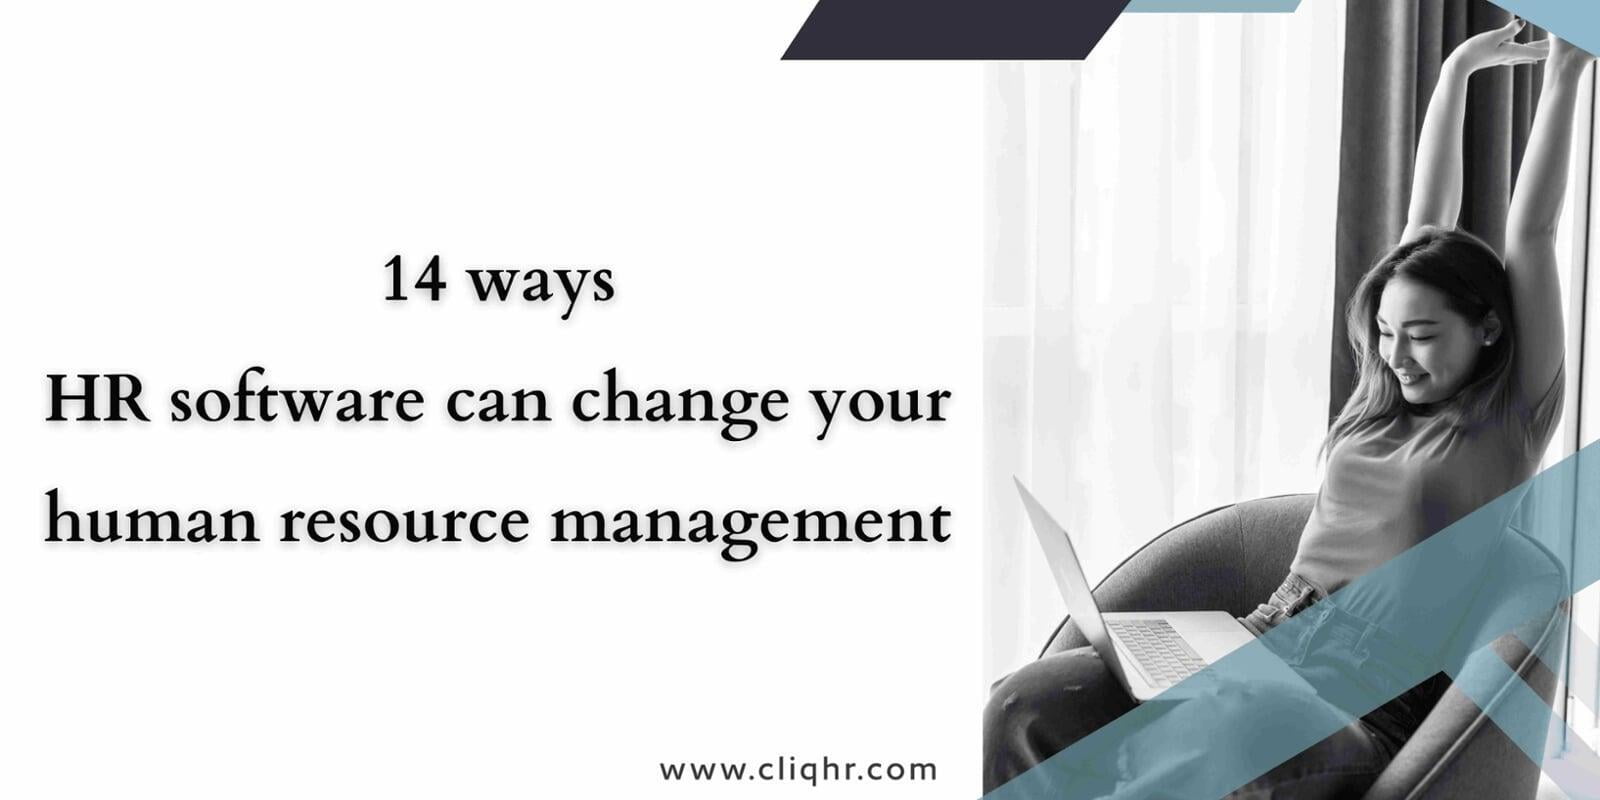 14-ways-hr-software-can-change-your-human-resource-management